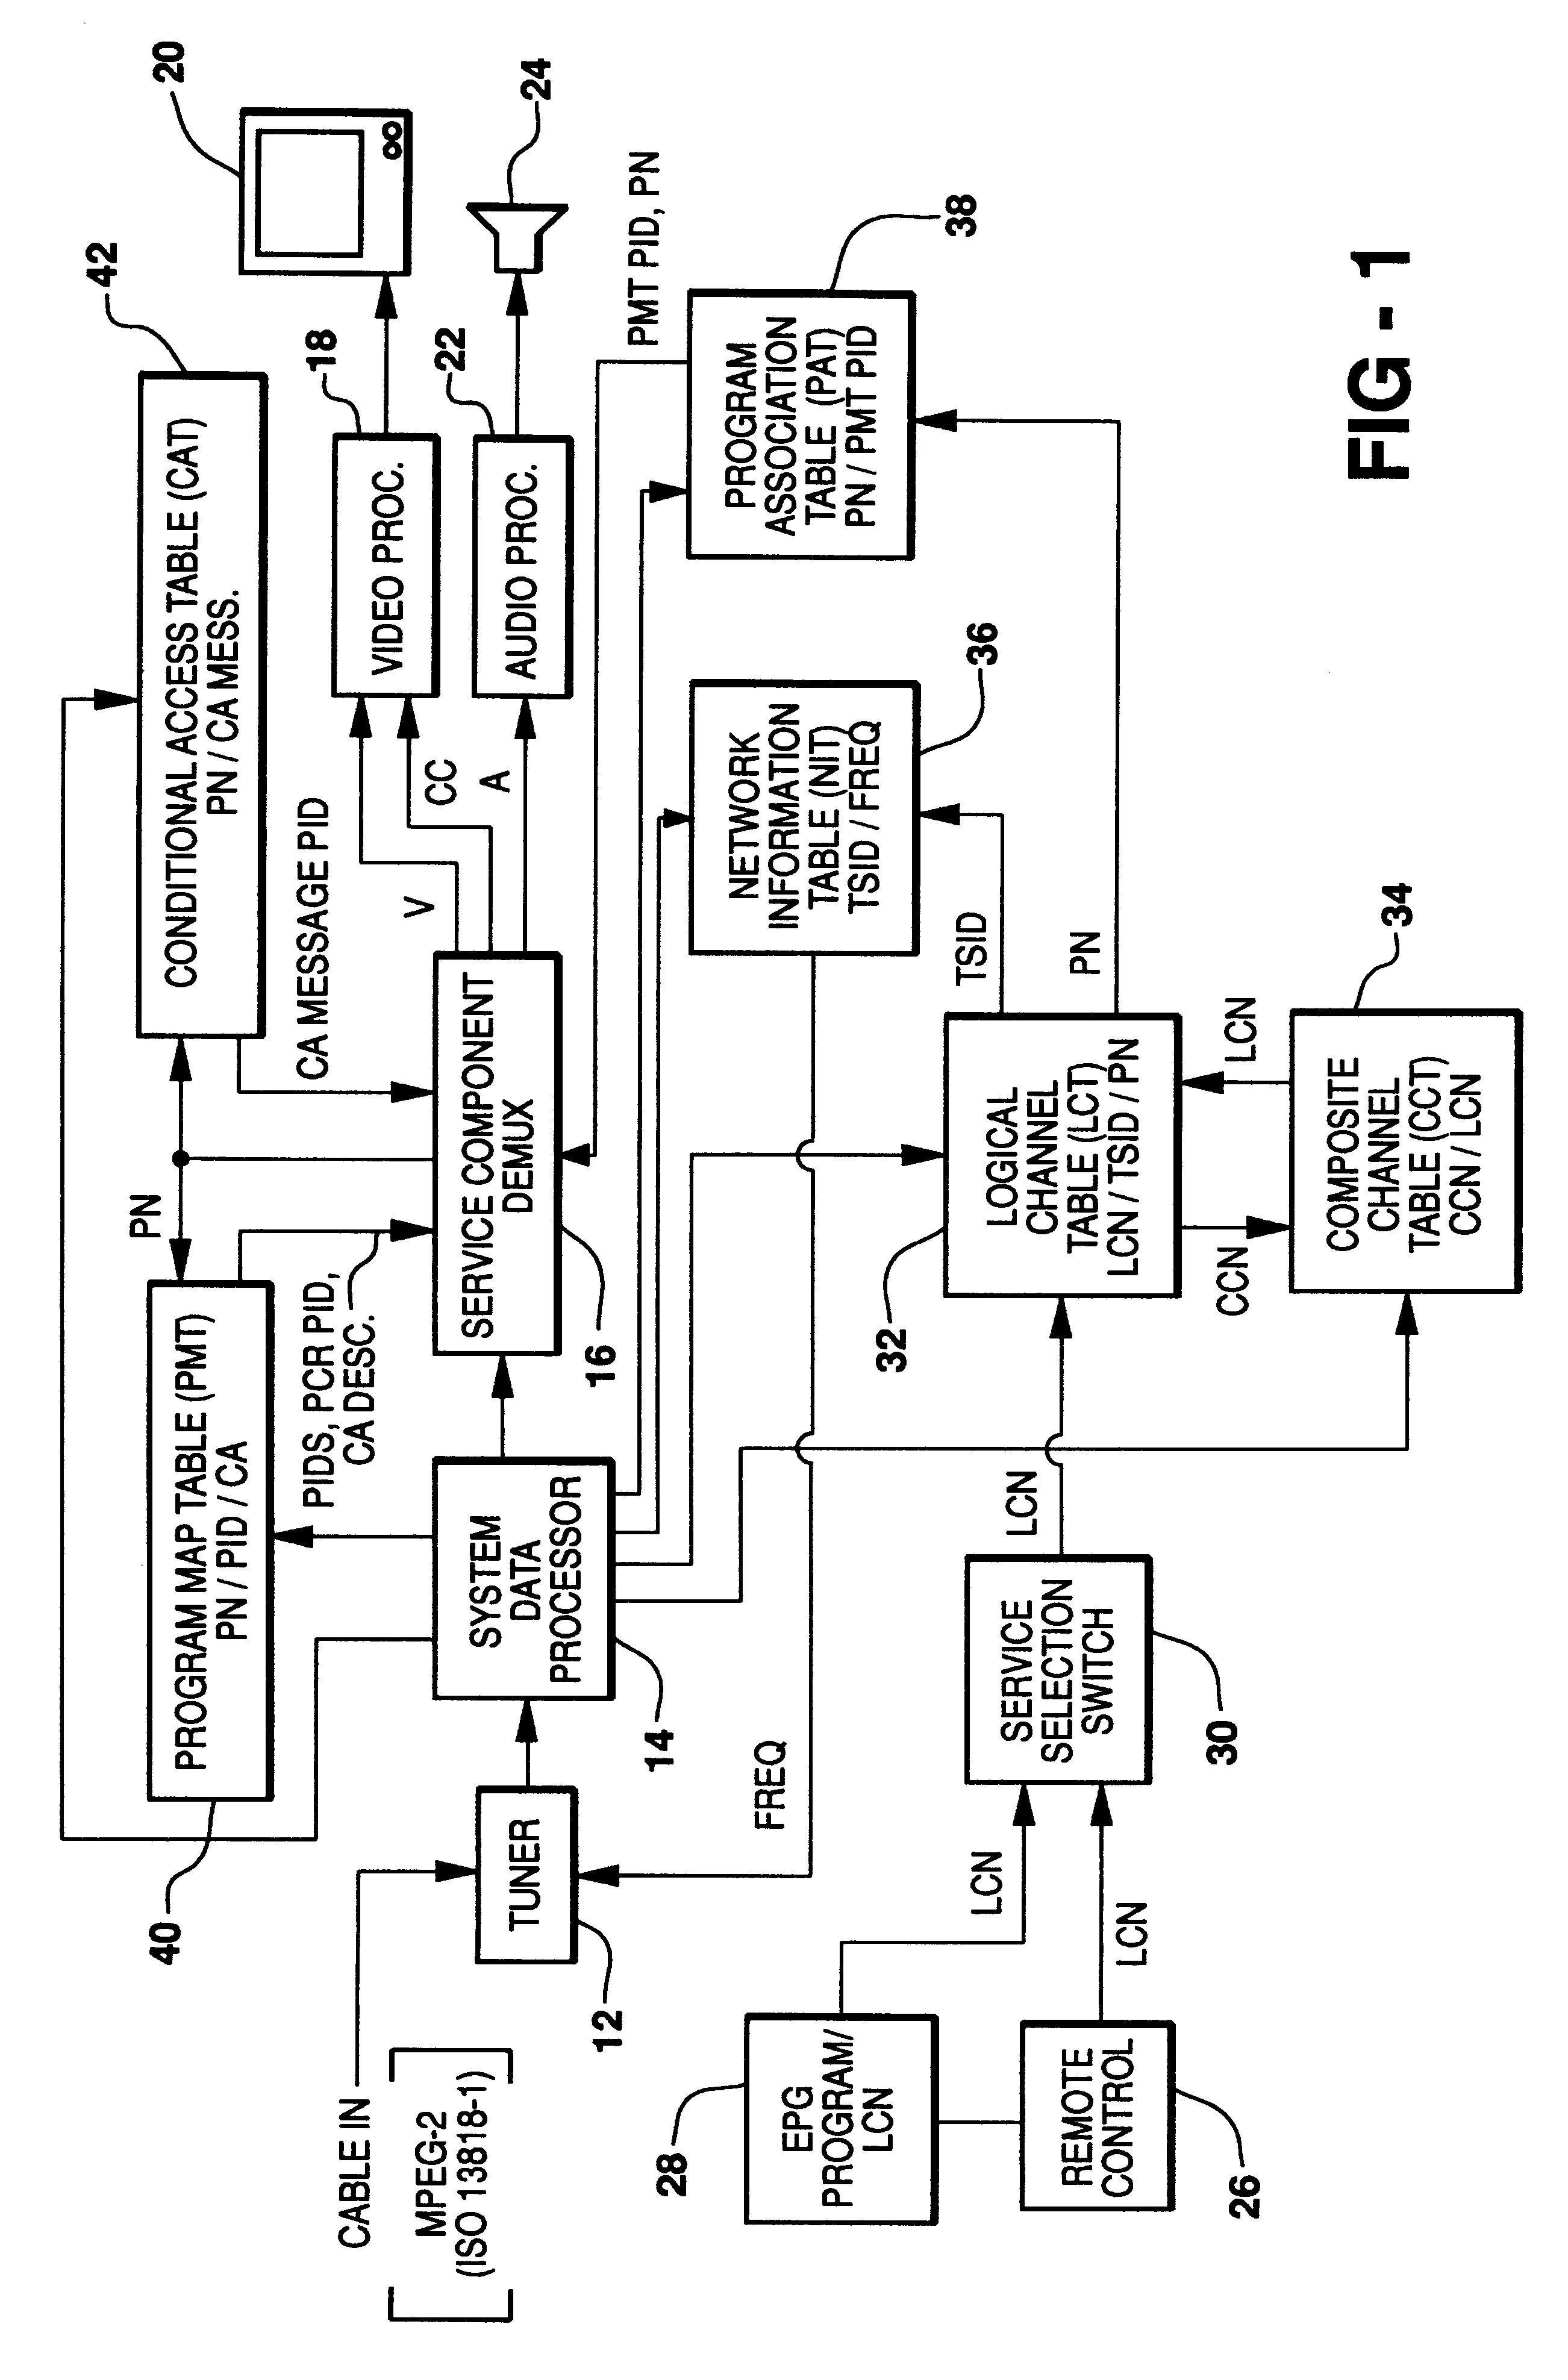 Logical and composite channel mapping in an MPEG network